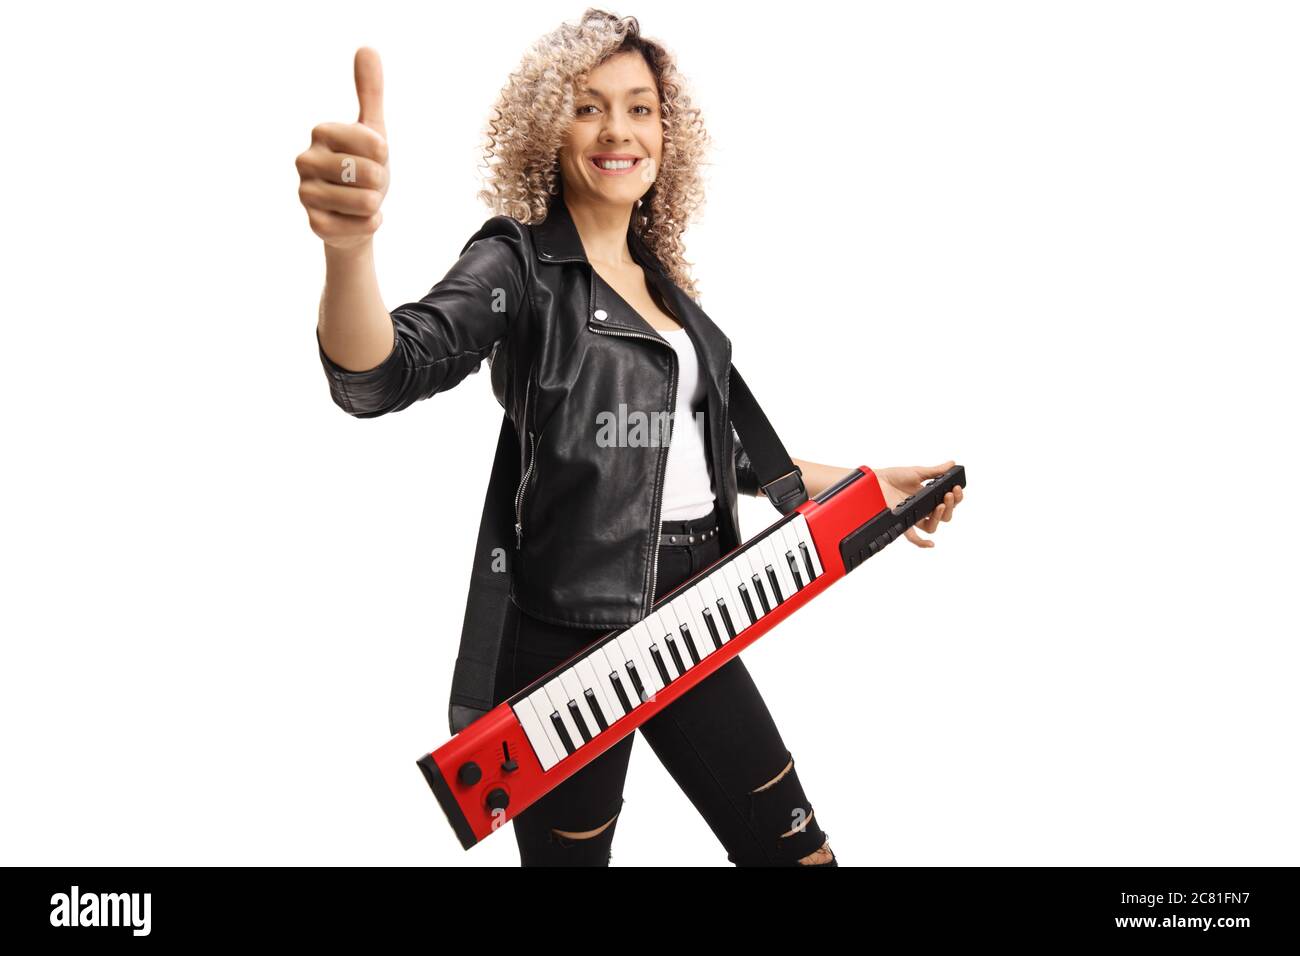 Woman with a red keytar synthesizer showing a thumb up sign isolated on white background Stock Photo